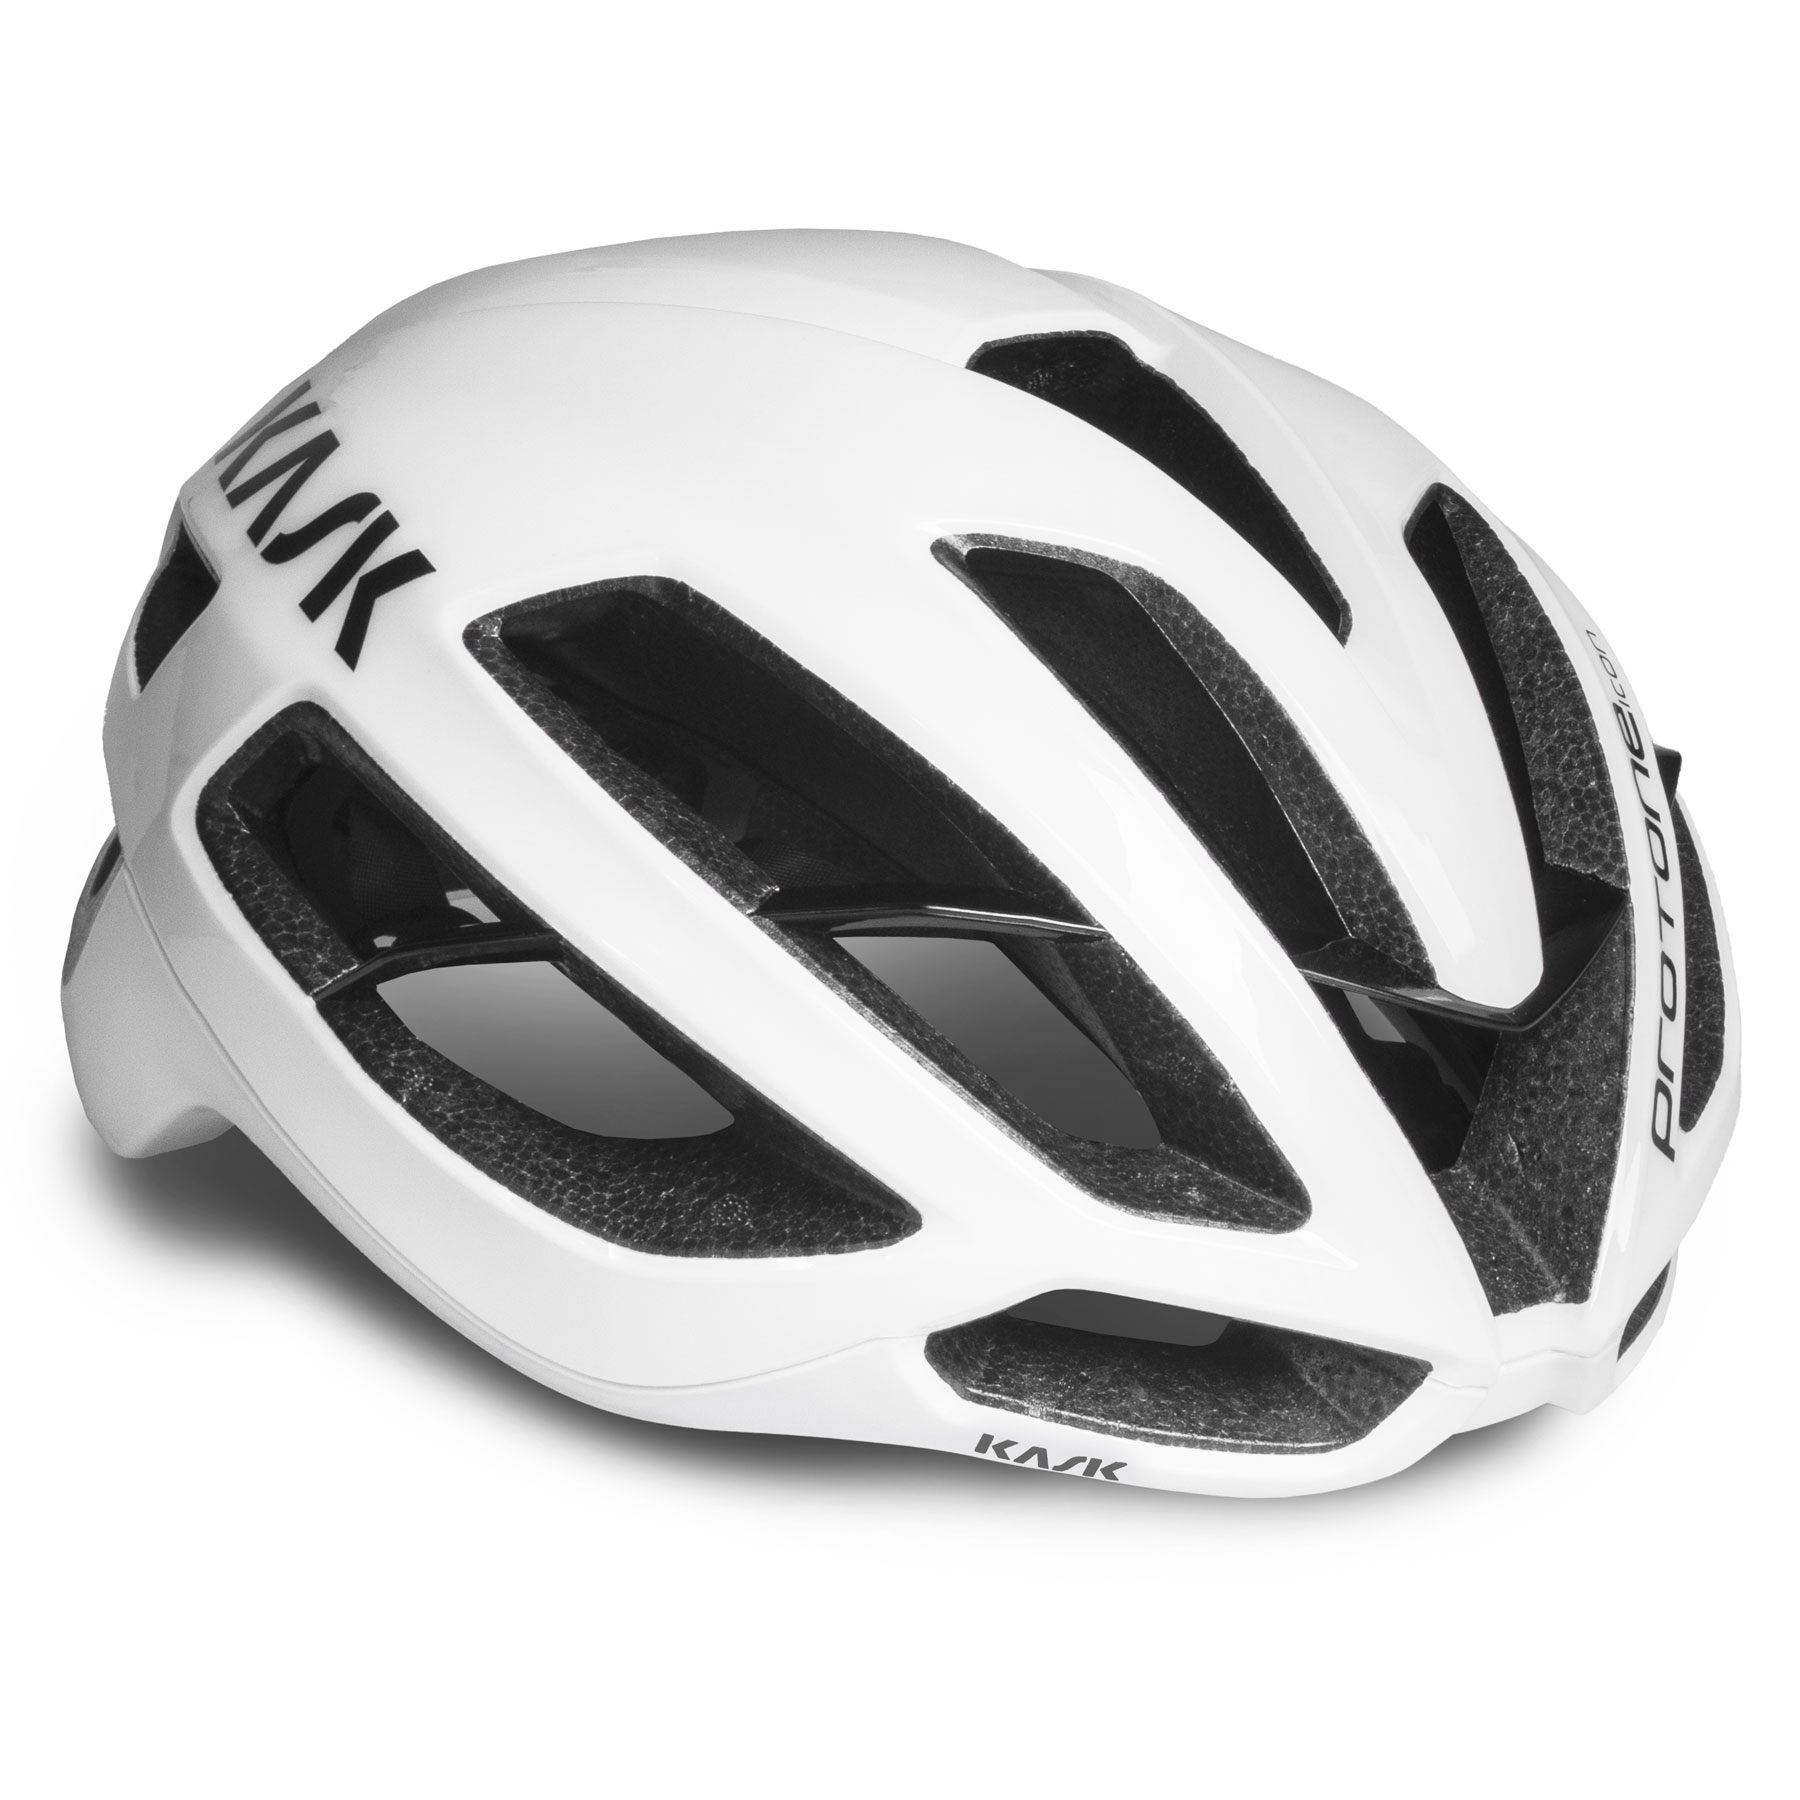 Picture of KASK Protone Icon WG11 Road Helmet - white